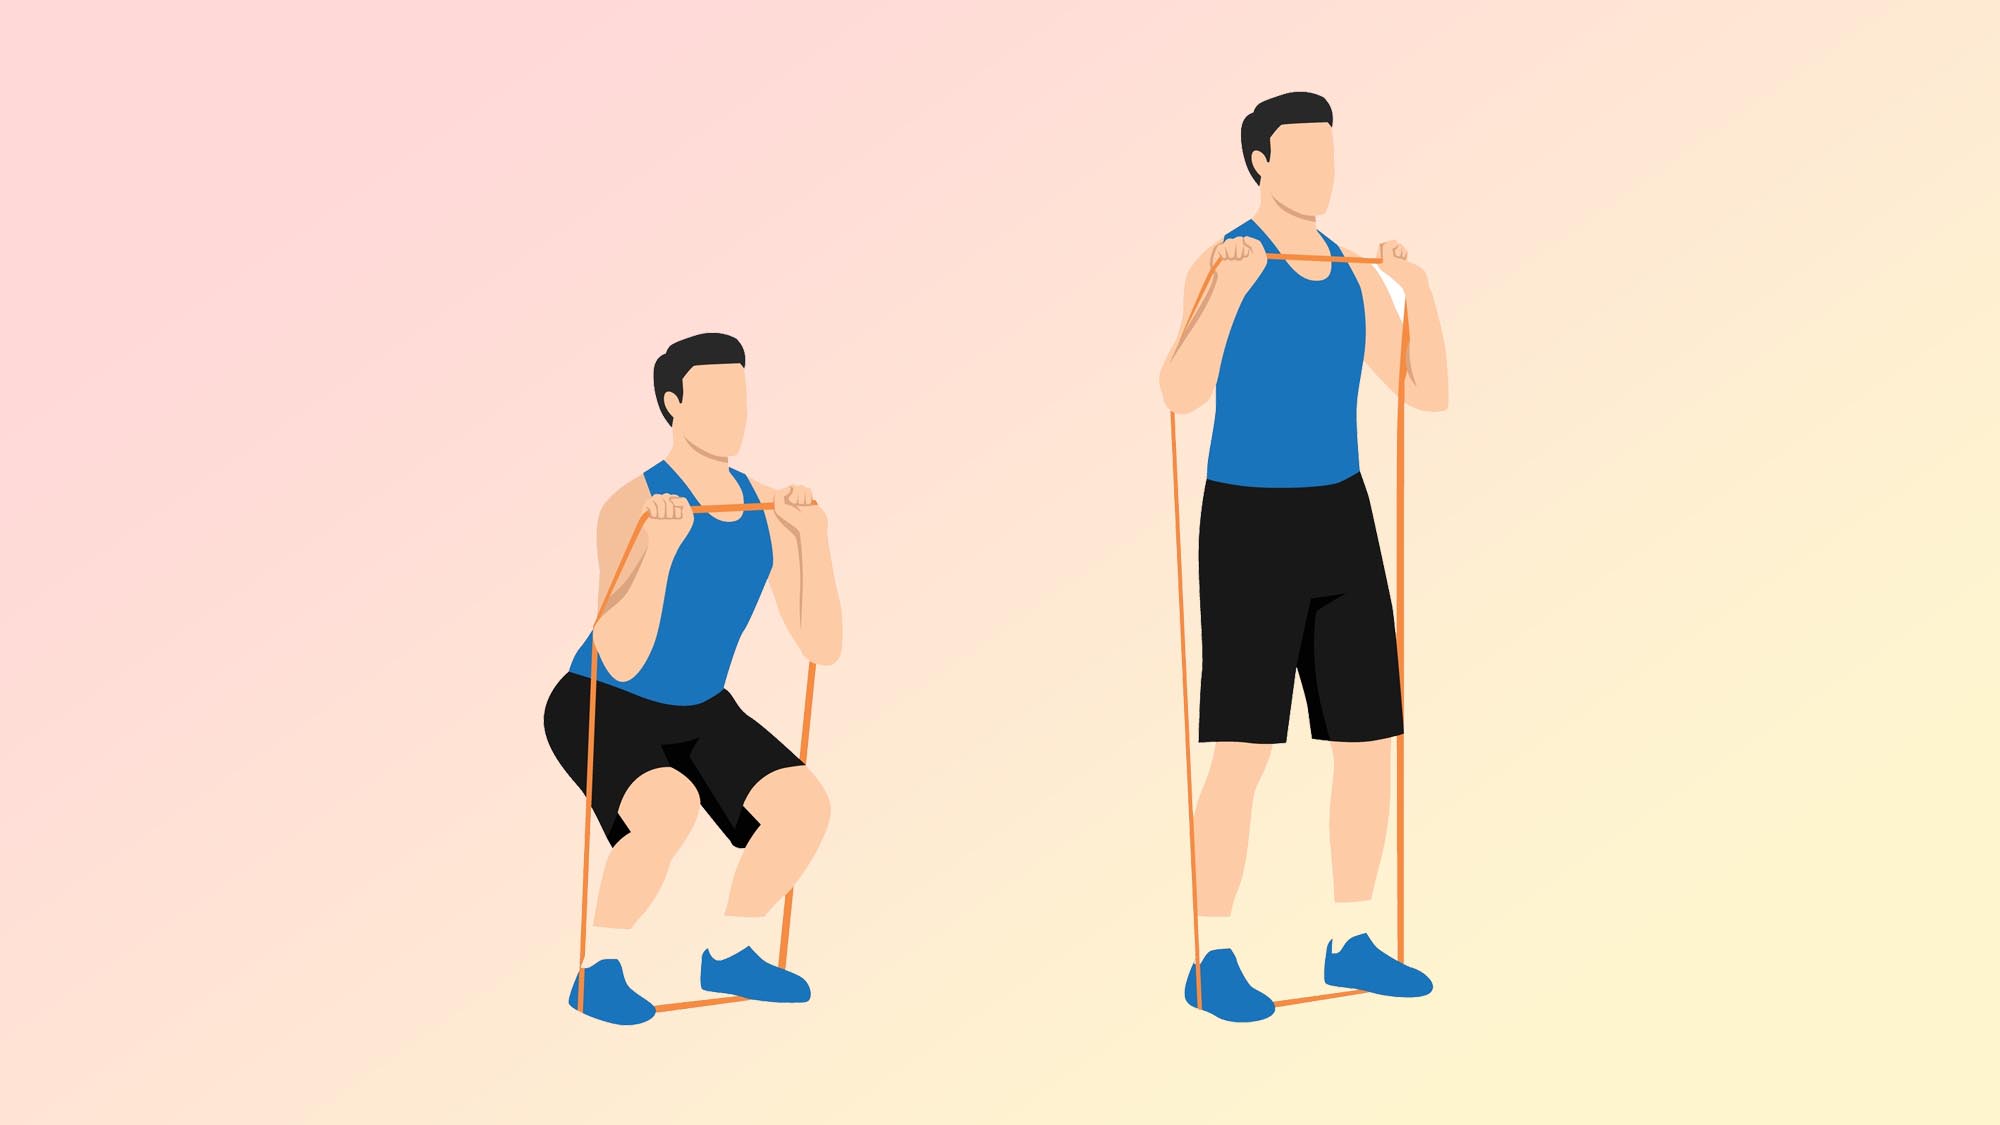 Illustration of a Man Doing Squats with a Resistance Band